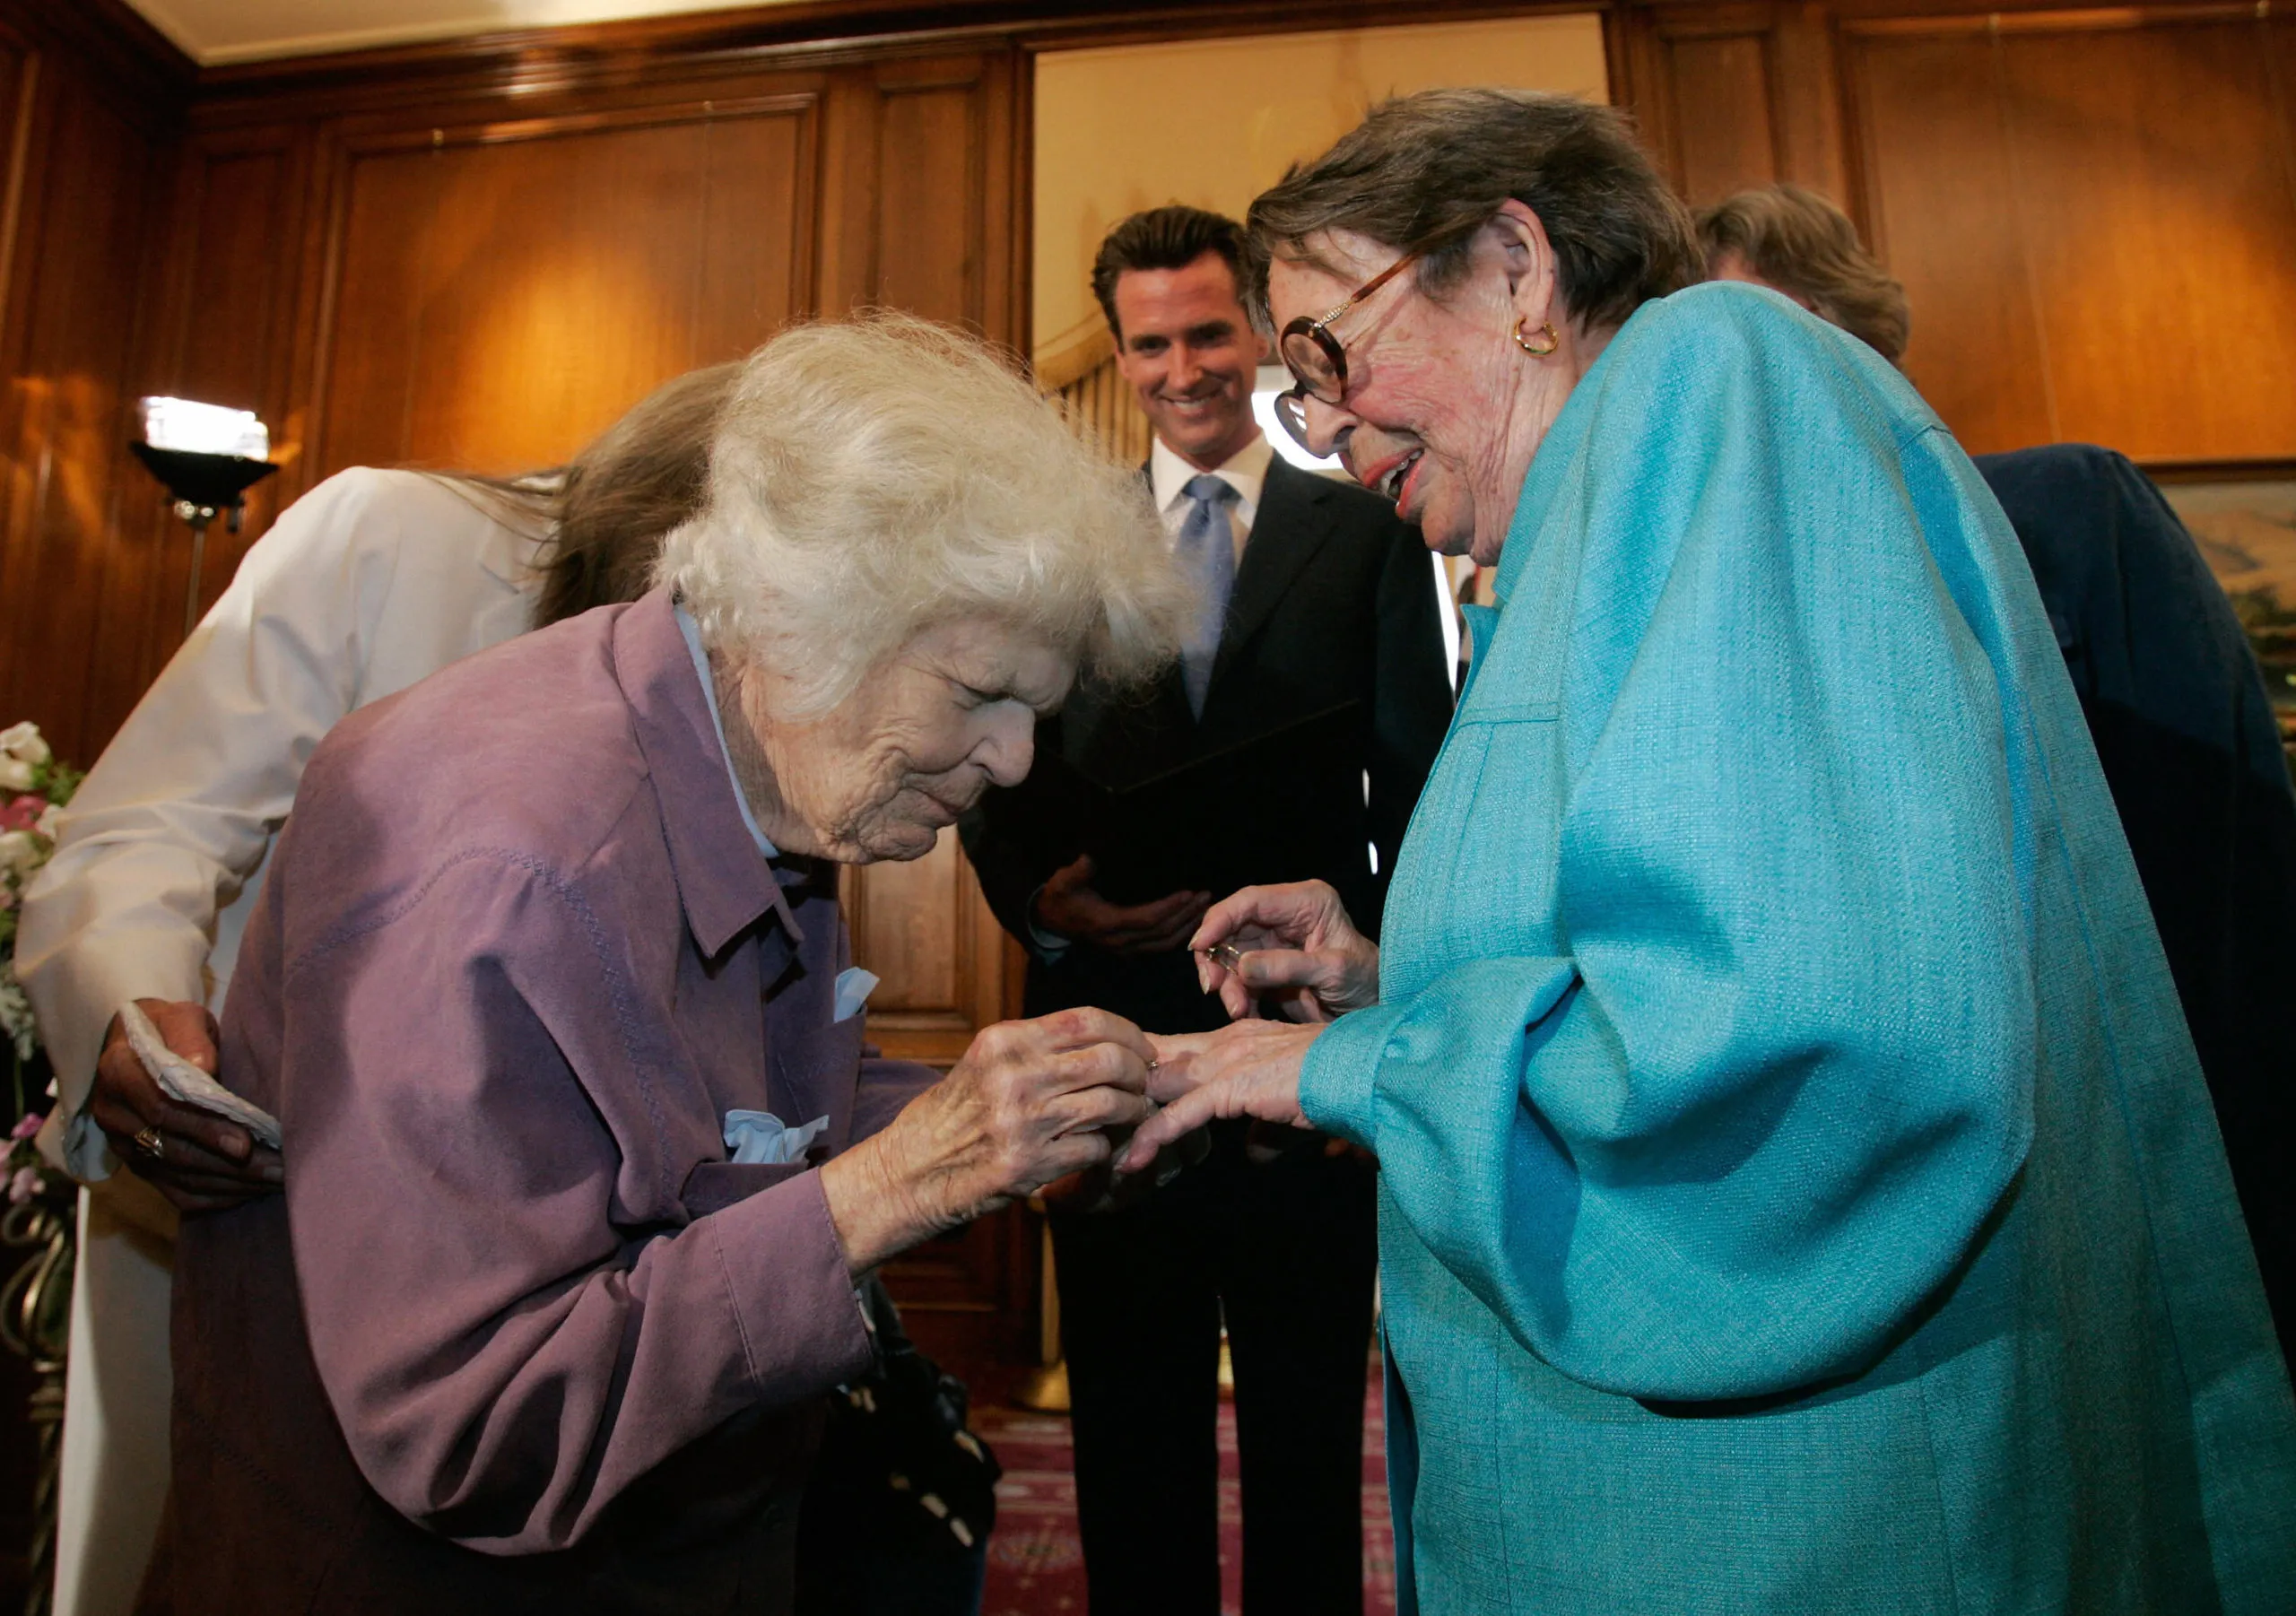 Phyllis Lyon, pioneering lesbian activist, has died at the age of 95